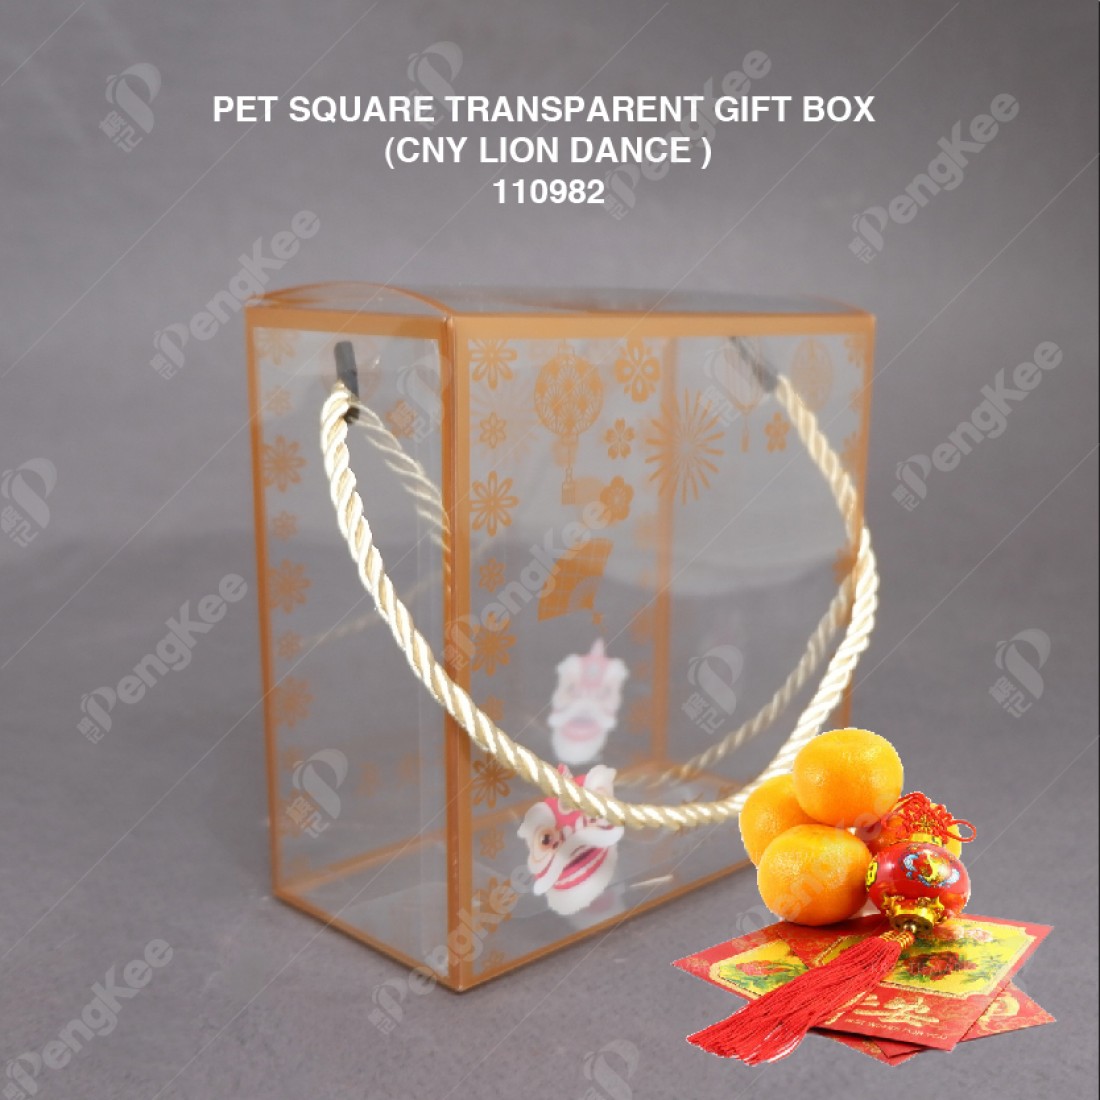 PVC TRANSPARENT GIFT BOX FOR CHINSESE NEW YEAR (CNY LION DANCE )PCS/PKT